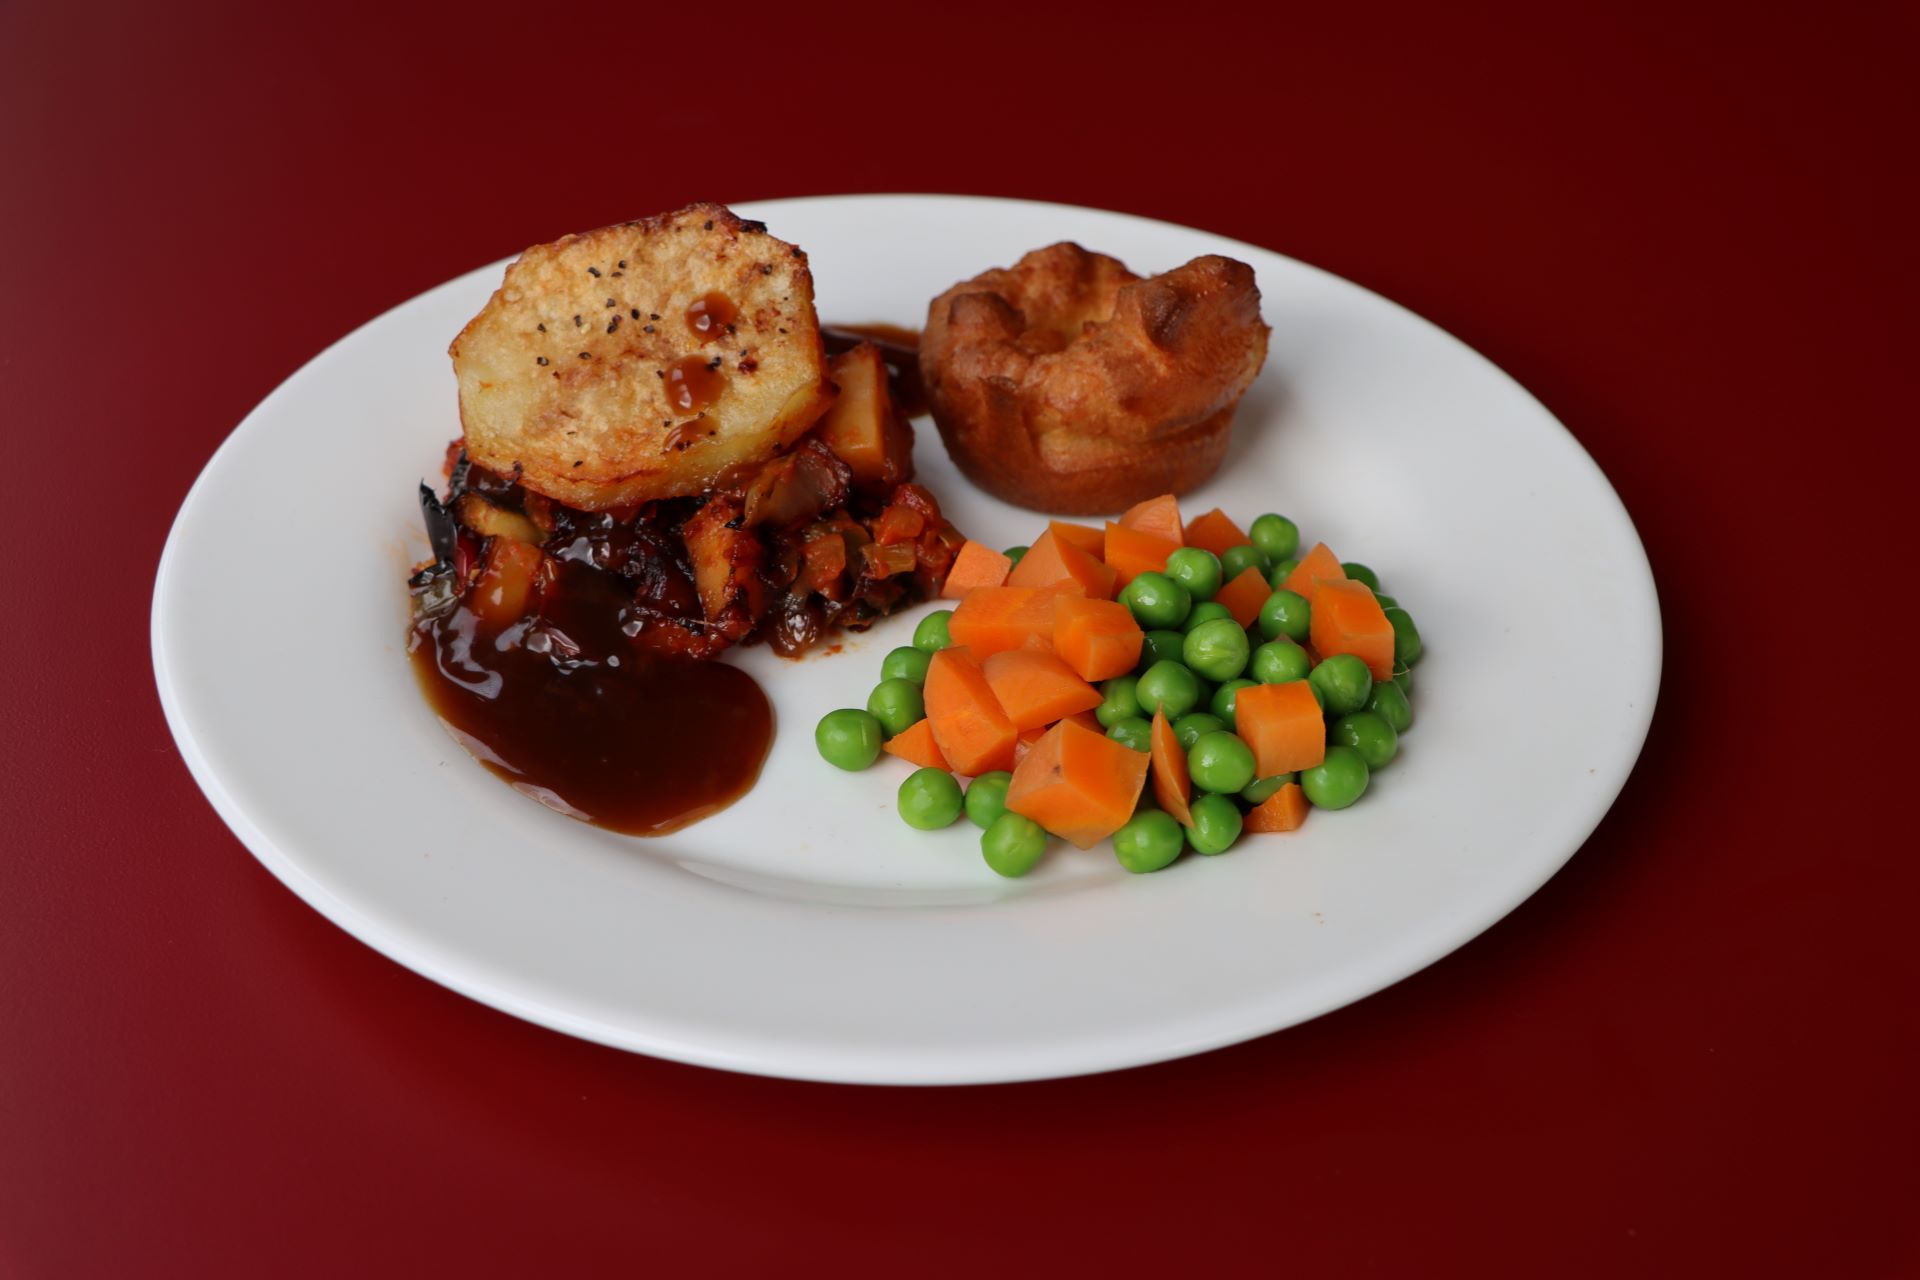 Autumn Vegetable Hot Pot with Yorkshire Pudding, Diced Carrots, Peas and Gravy